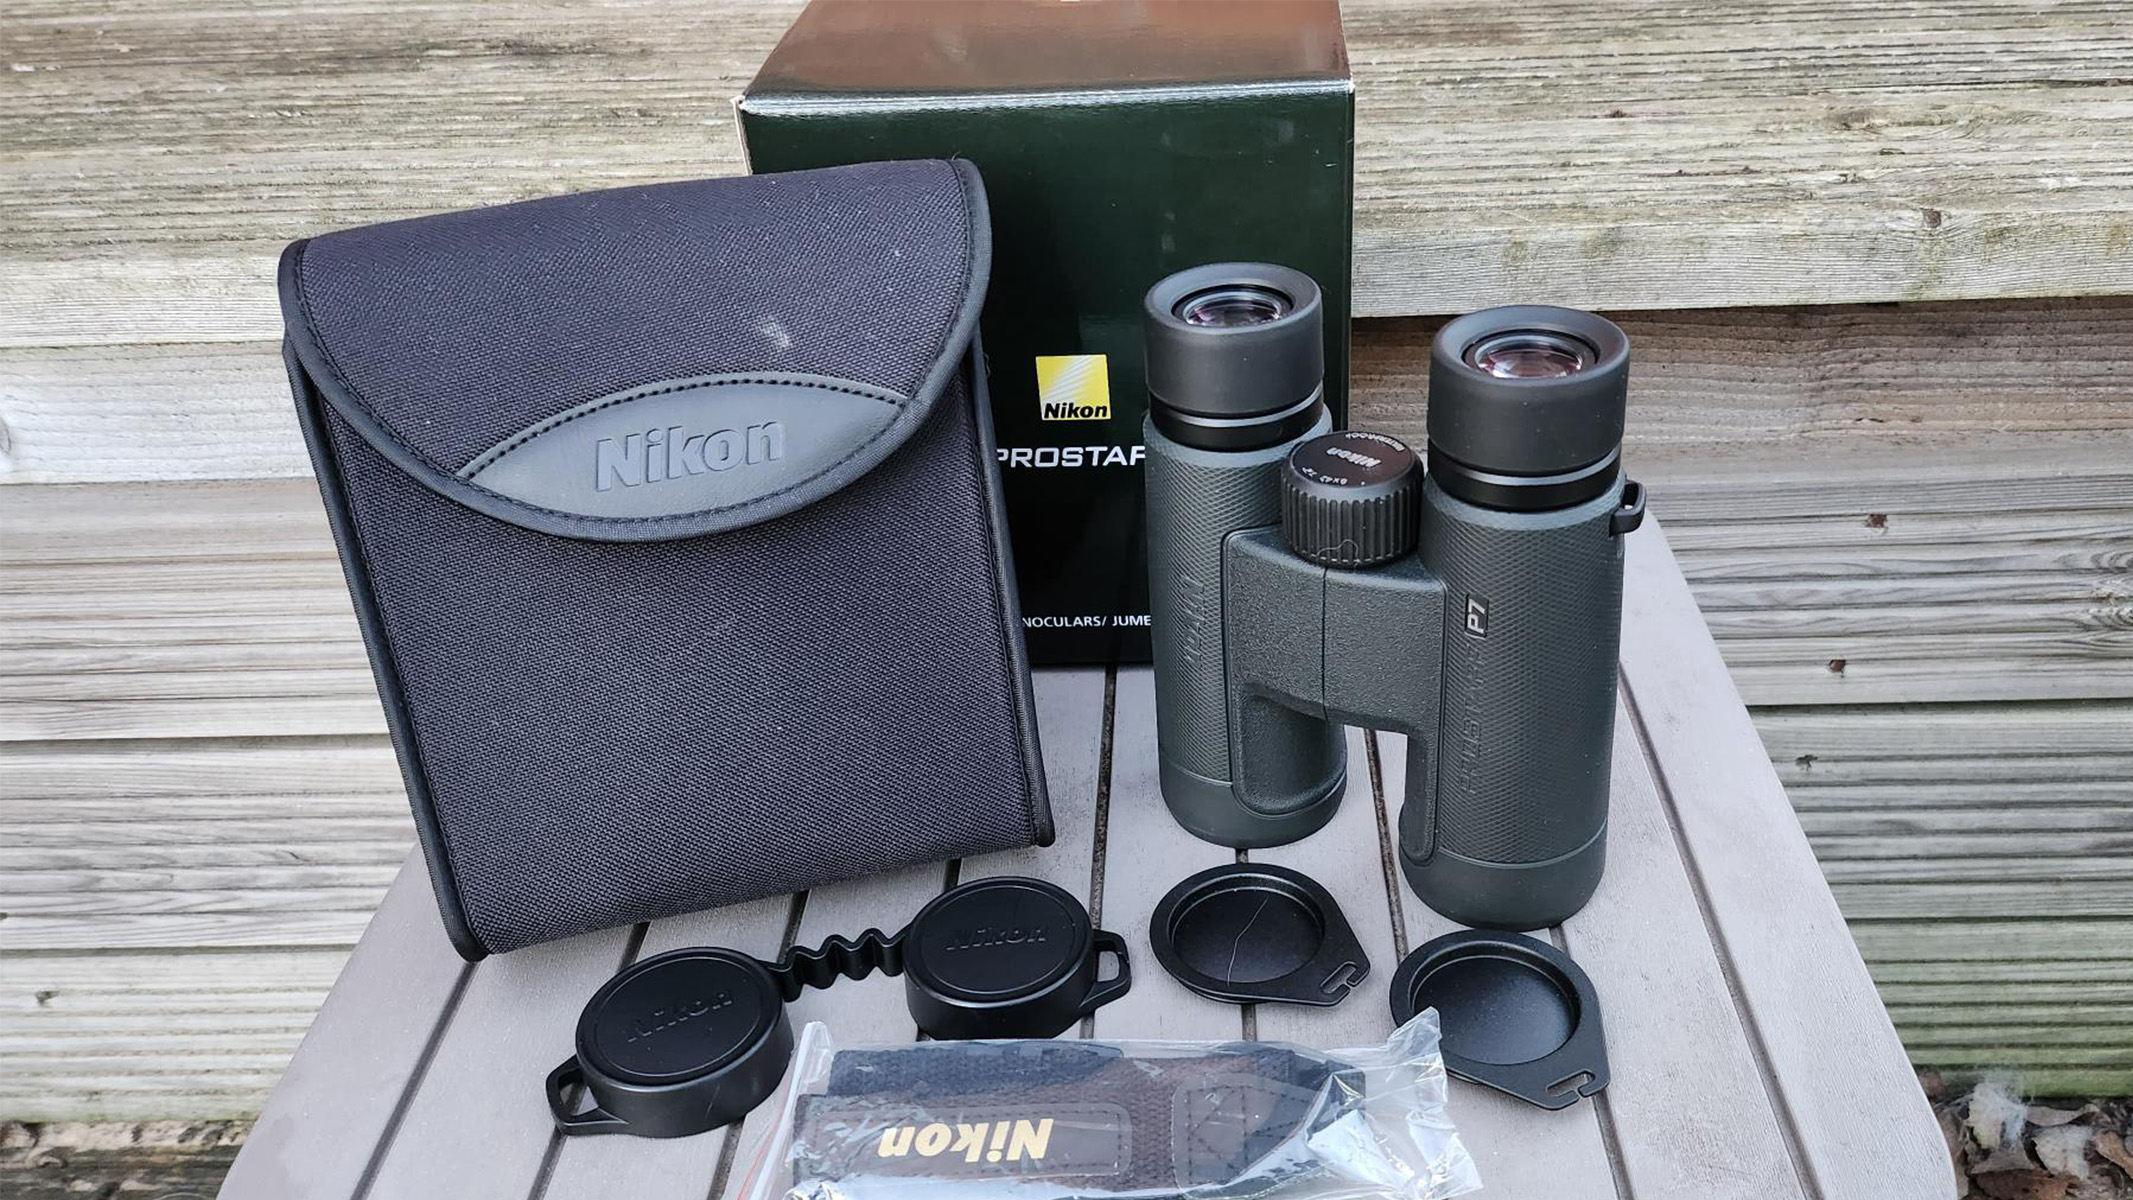 A photo of the Nikon Prostaff P7 8x42 and included accessories